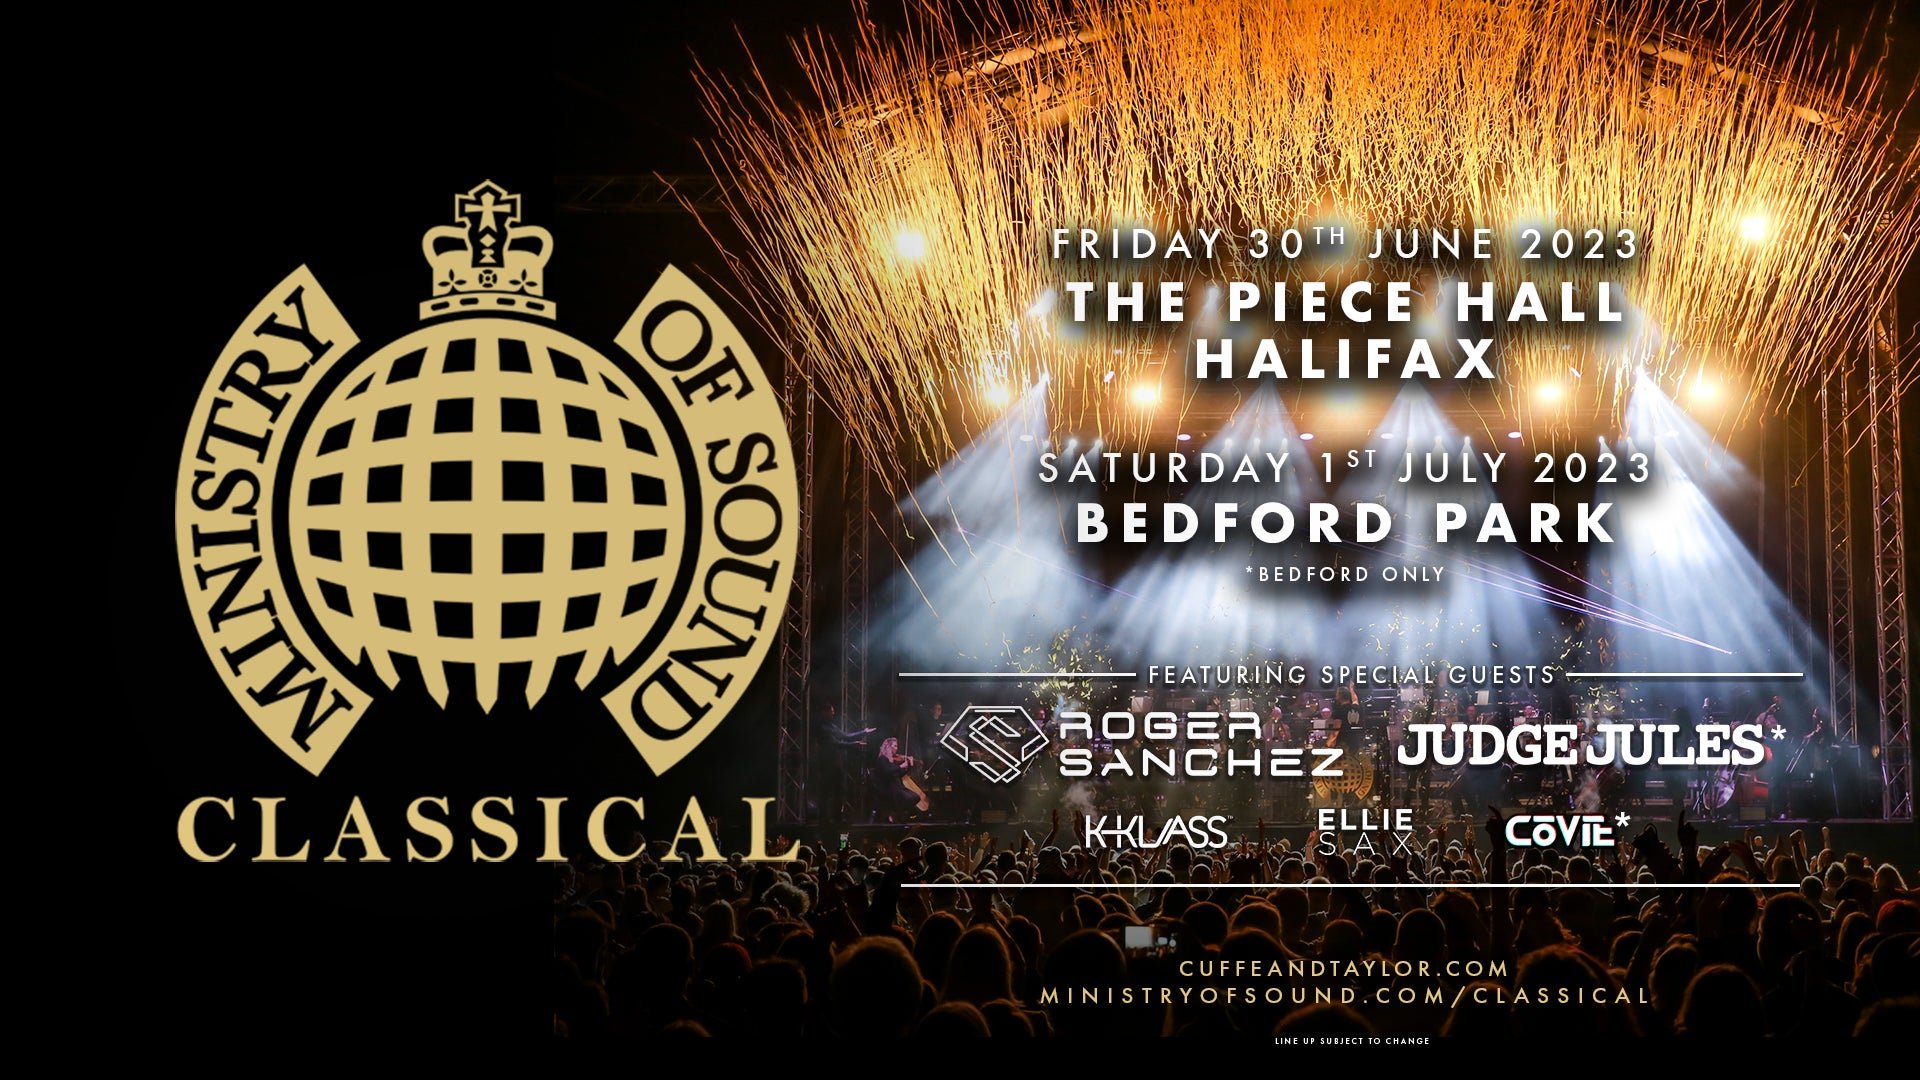 Image name Ministry of Sound Classical at The Piece Hall the 28 image from the post Ministry of Sound Classical at The Piece Hall, Halifax in Yorkshire.com.